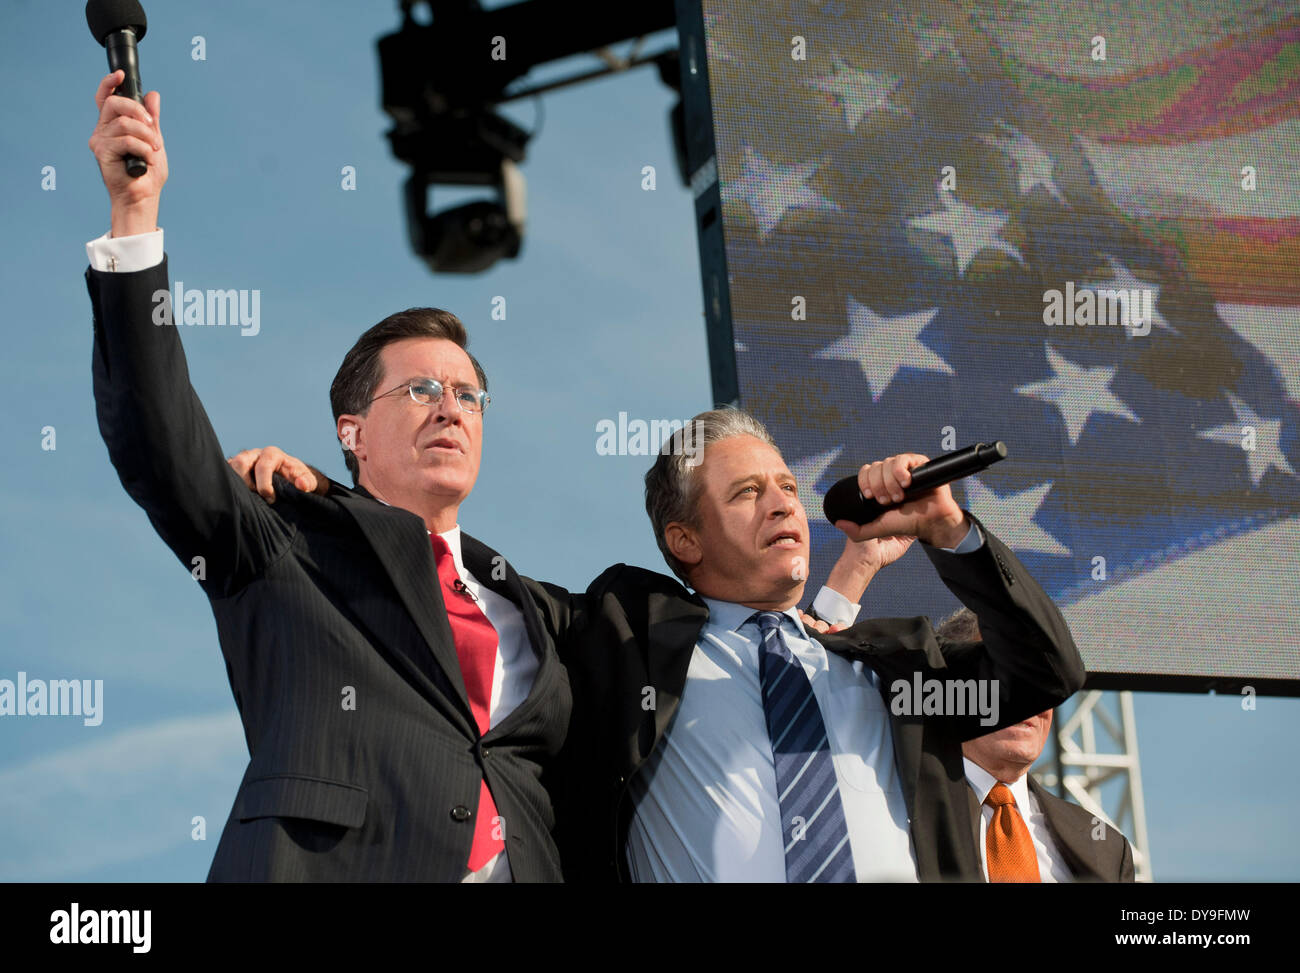 April 10, 2014 - CBS network announced the replacement for outgoing 'Late Show' host D. Letterman. STEPHEN COLBERT, whose satirical 'The Colbert Report' on Comedy Central competes in the same time slot, has landed the sought-after gig. PICTURED: Oct 30, 2010 - Washington, District of Columbia, U.S. - Jon Stewart and STEPHEN Colbert held a rally on the National Mall before a cheering throng of supporters, called 'Rally to Restore Sanity and/or Fear'. (Credit Image: © Pete Marovich/ZUMA Wire/ZUMApress.com) Stock Photo